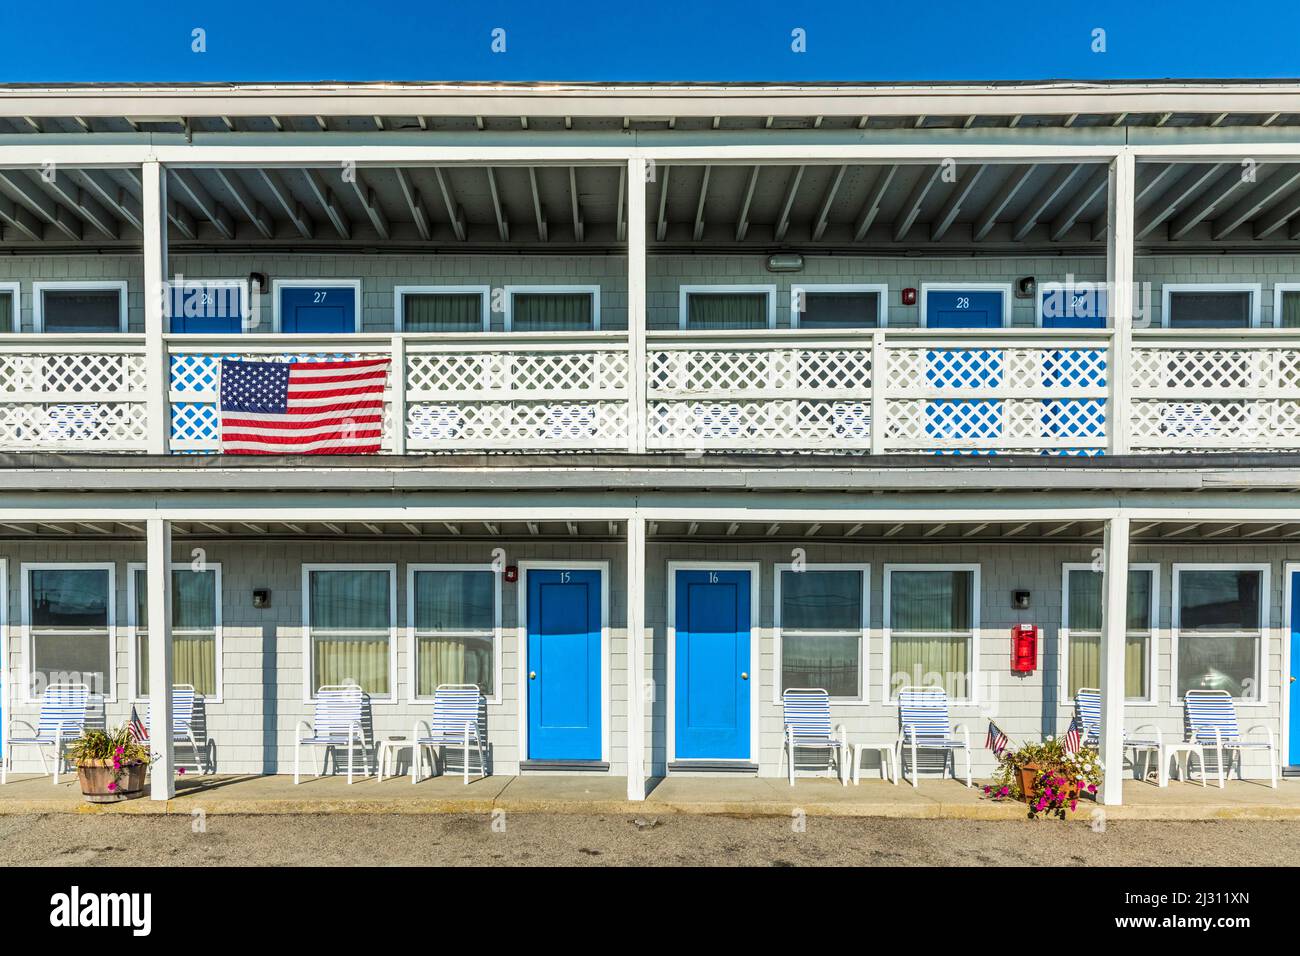 RYE, USA - SEP 27, 2017: facade of typical american Motel at the beach in Rye, New Hampshire, USA. Stock Photo